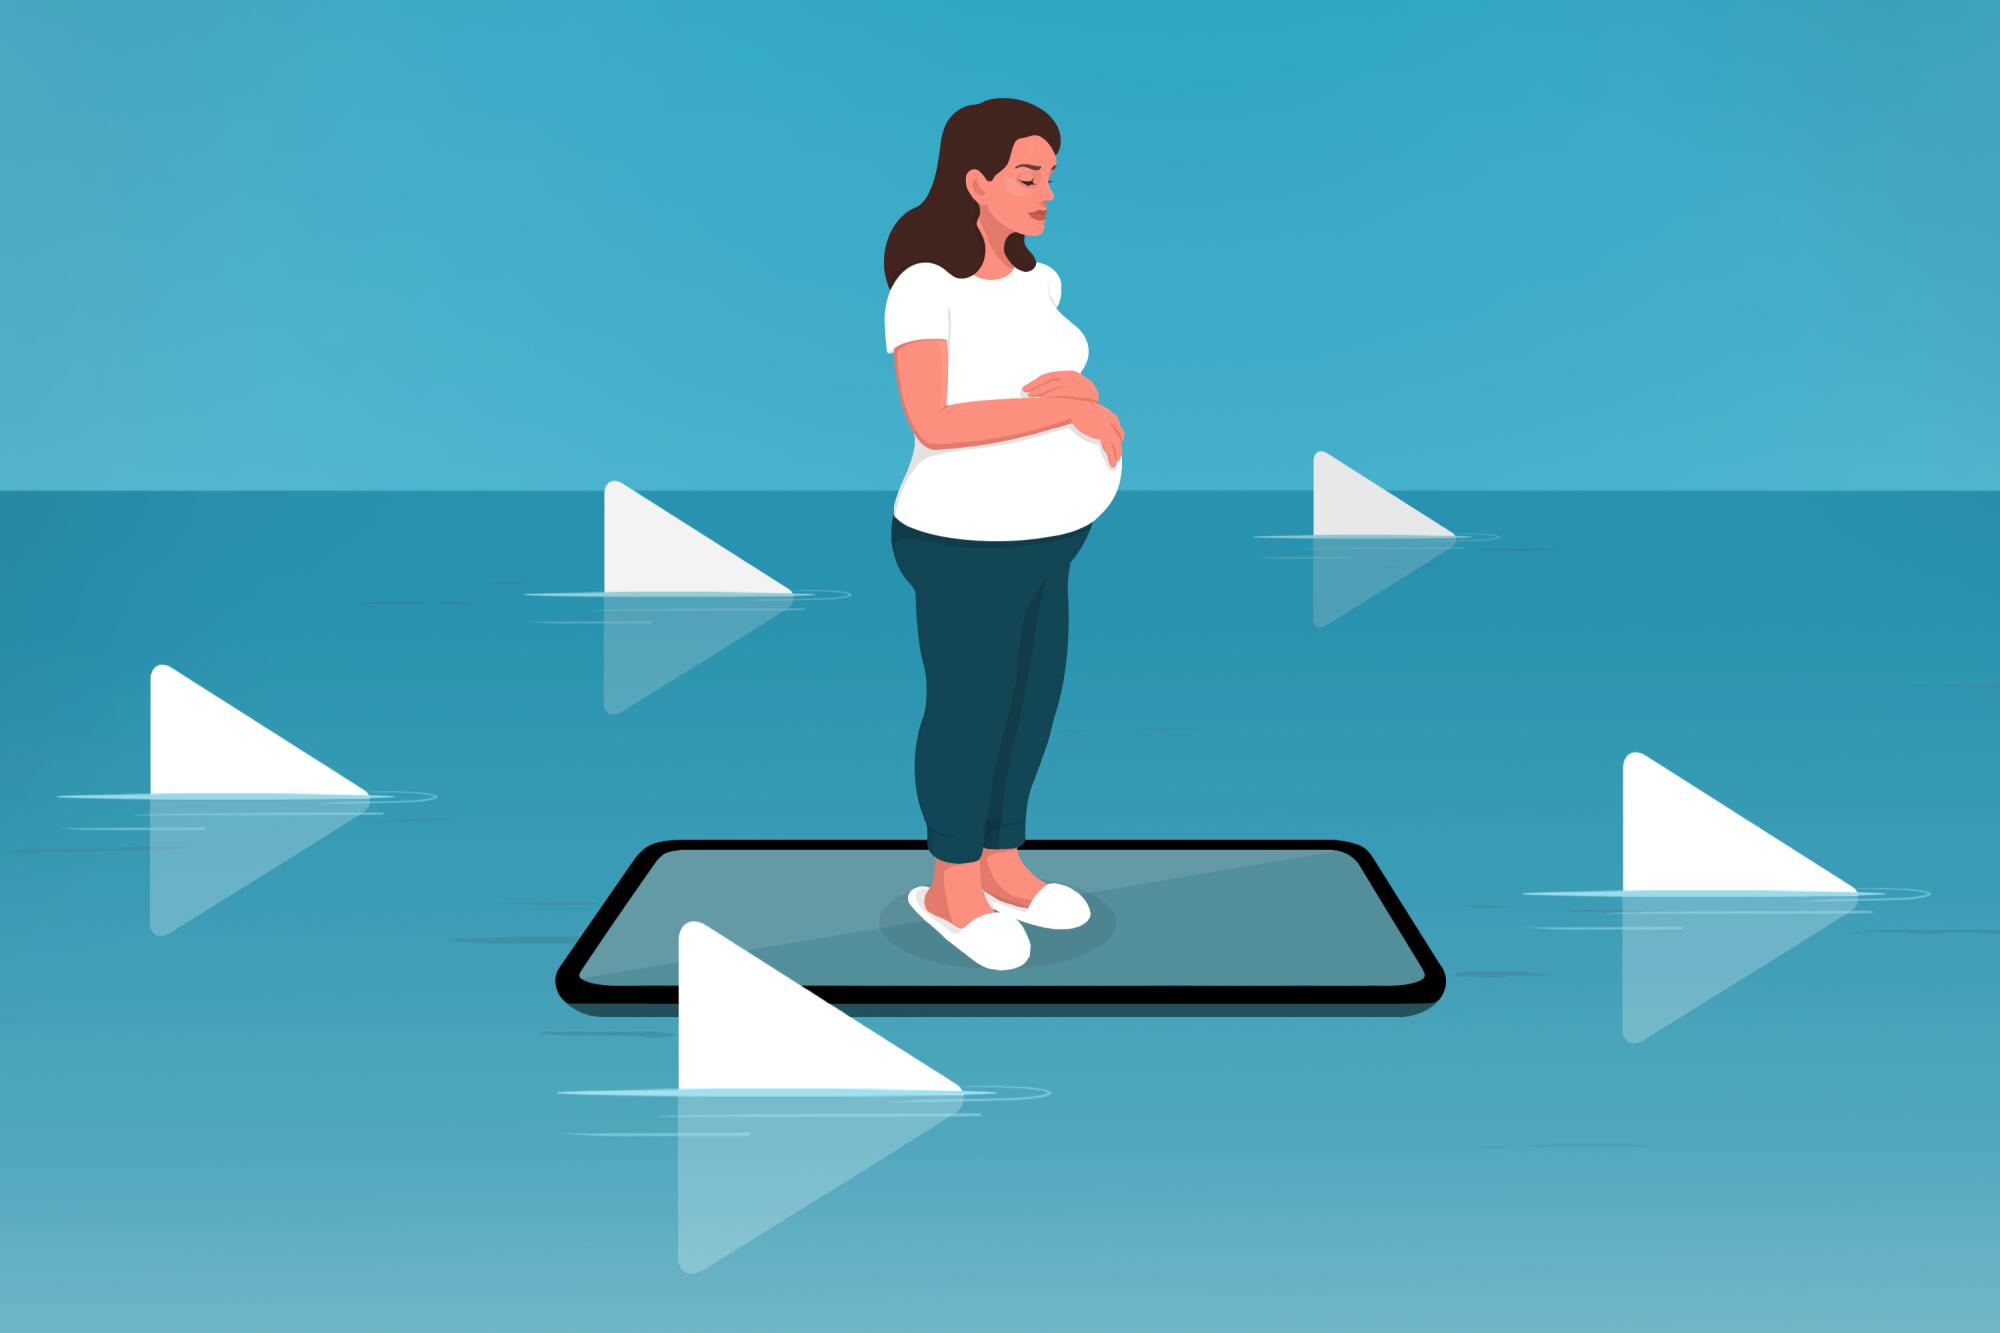 An illustration shows a pregnant woman standing on a phone in the sea. Play buttons circle her like shark fins.